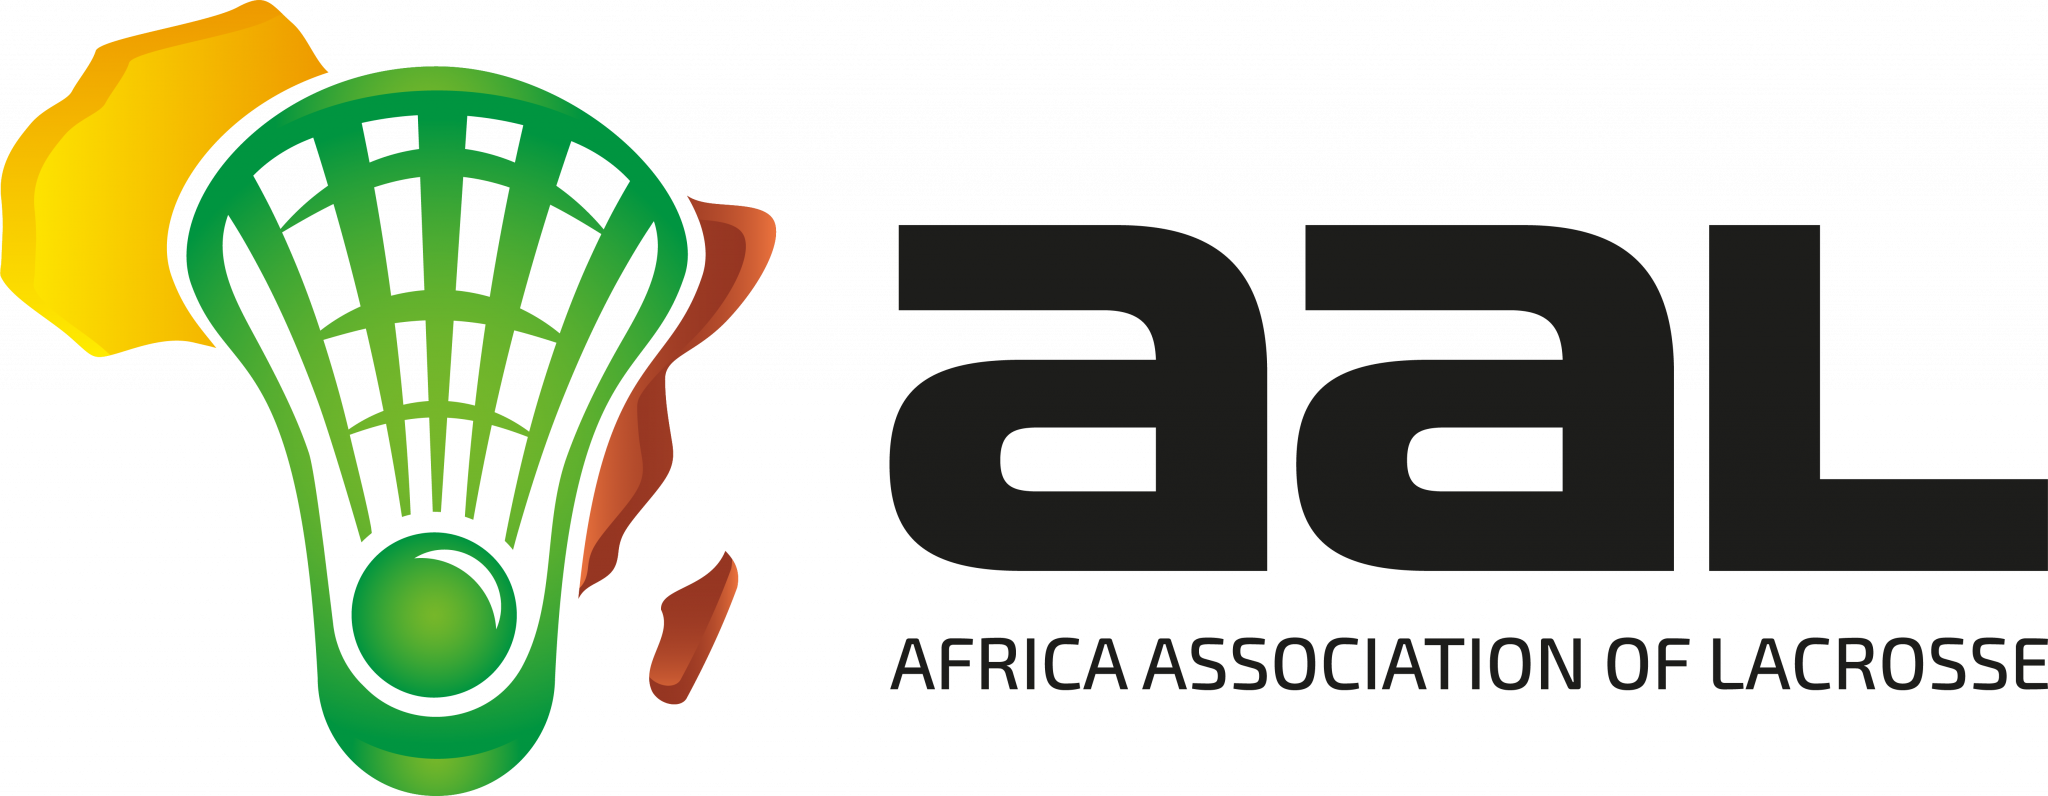 Africa Association of Lacrosse formed and Ghana's Ntiamoah installed as President